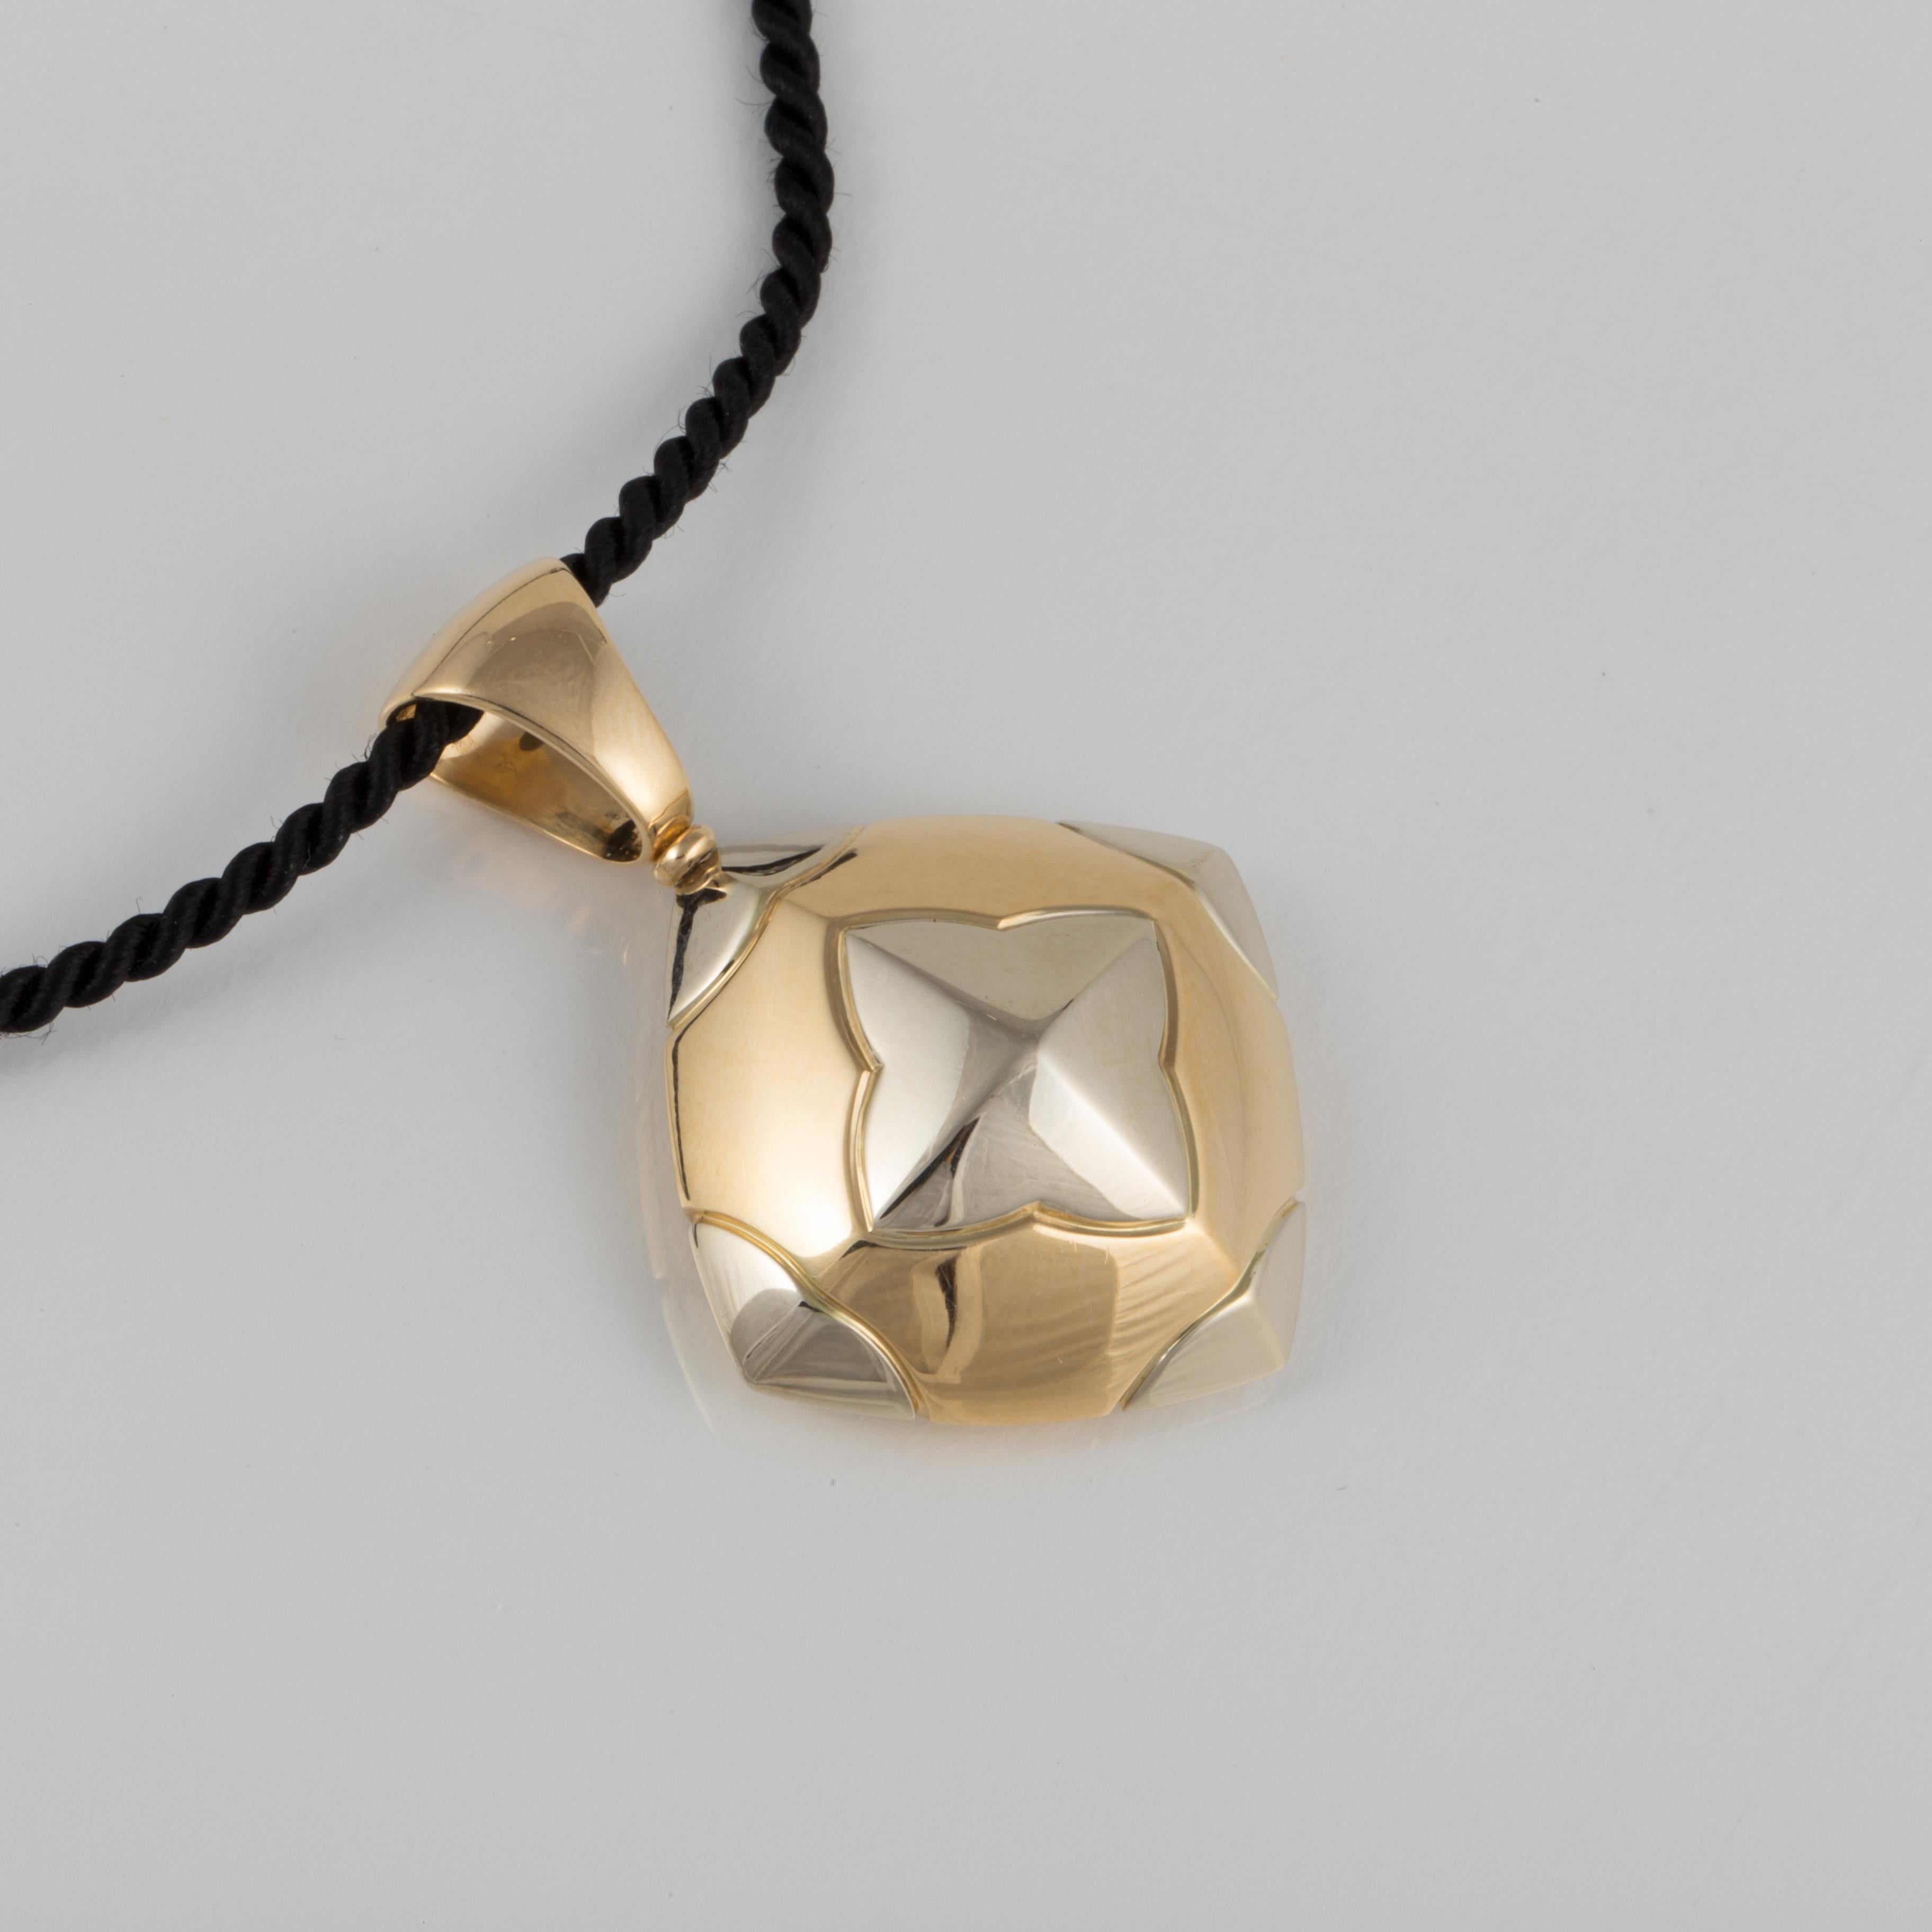 Bulgari Pyramide pendant in 18K yellow and white gold.  Pendant measures 1 5/8 inches long and 1 1/4 inches wide (including the bale).  The cord measures 15 1/2 long, and while included, is not Bulgari.